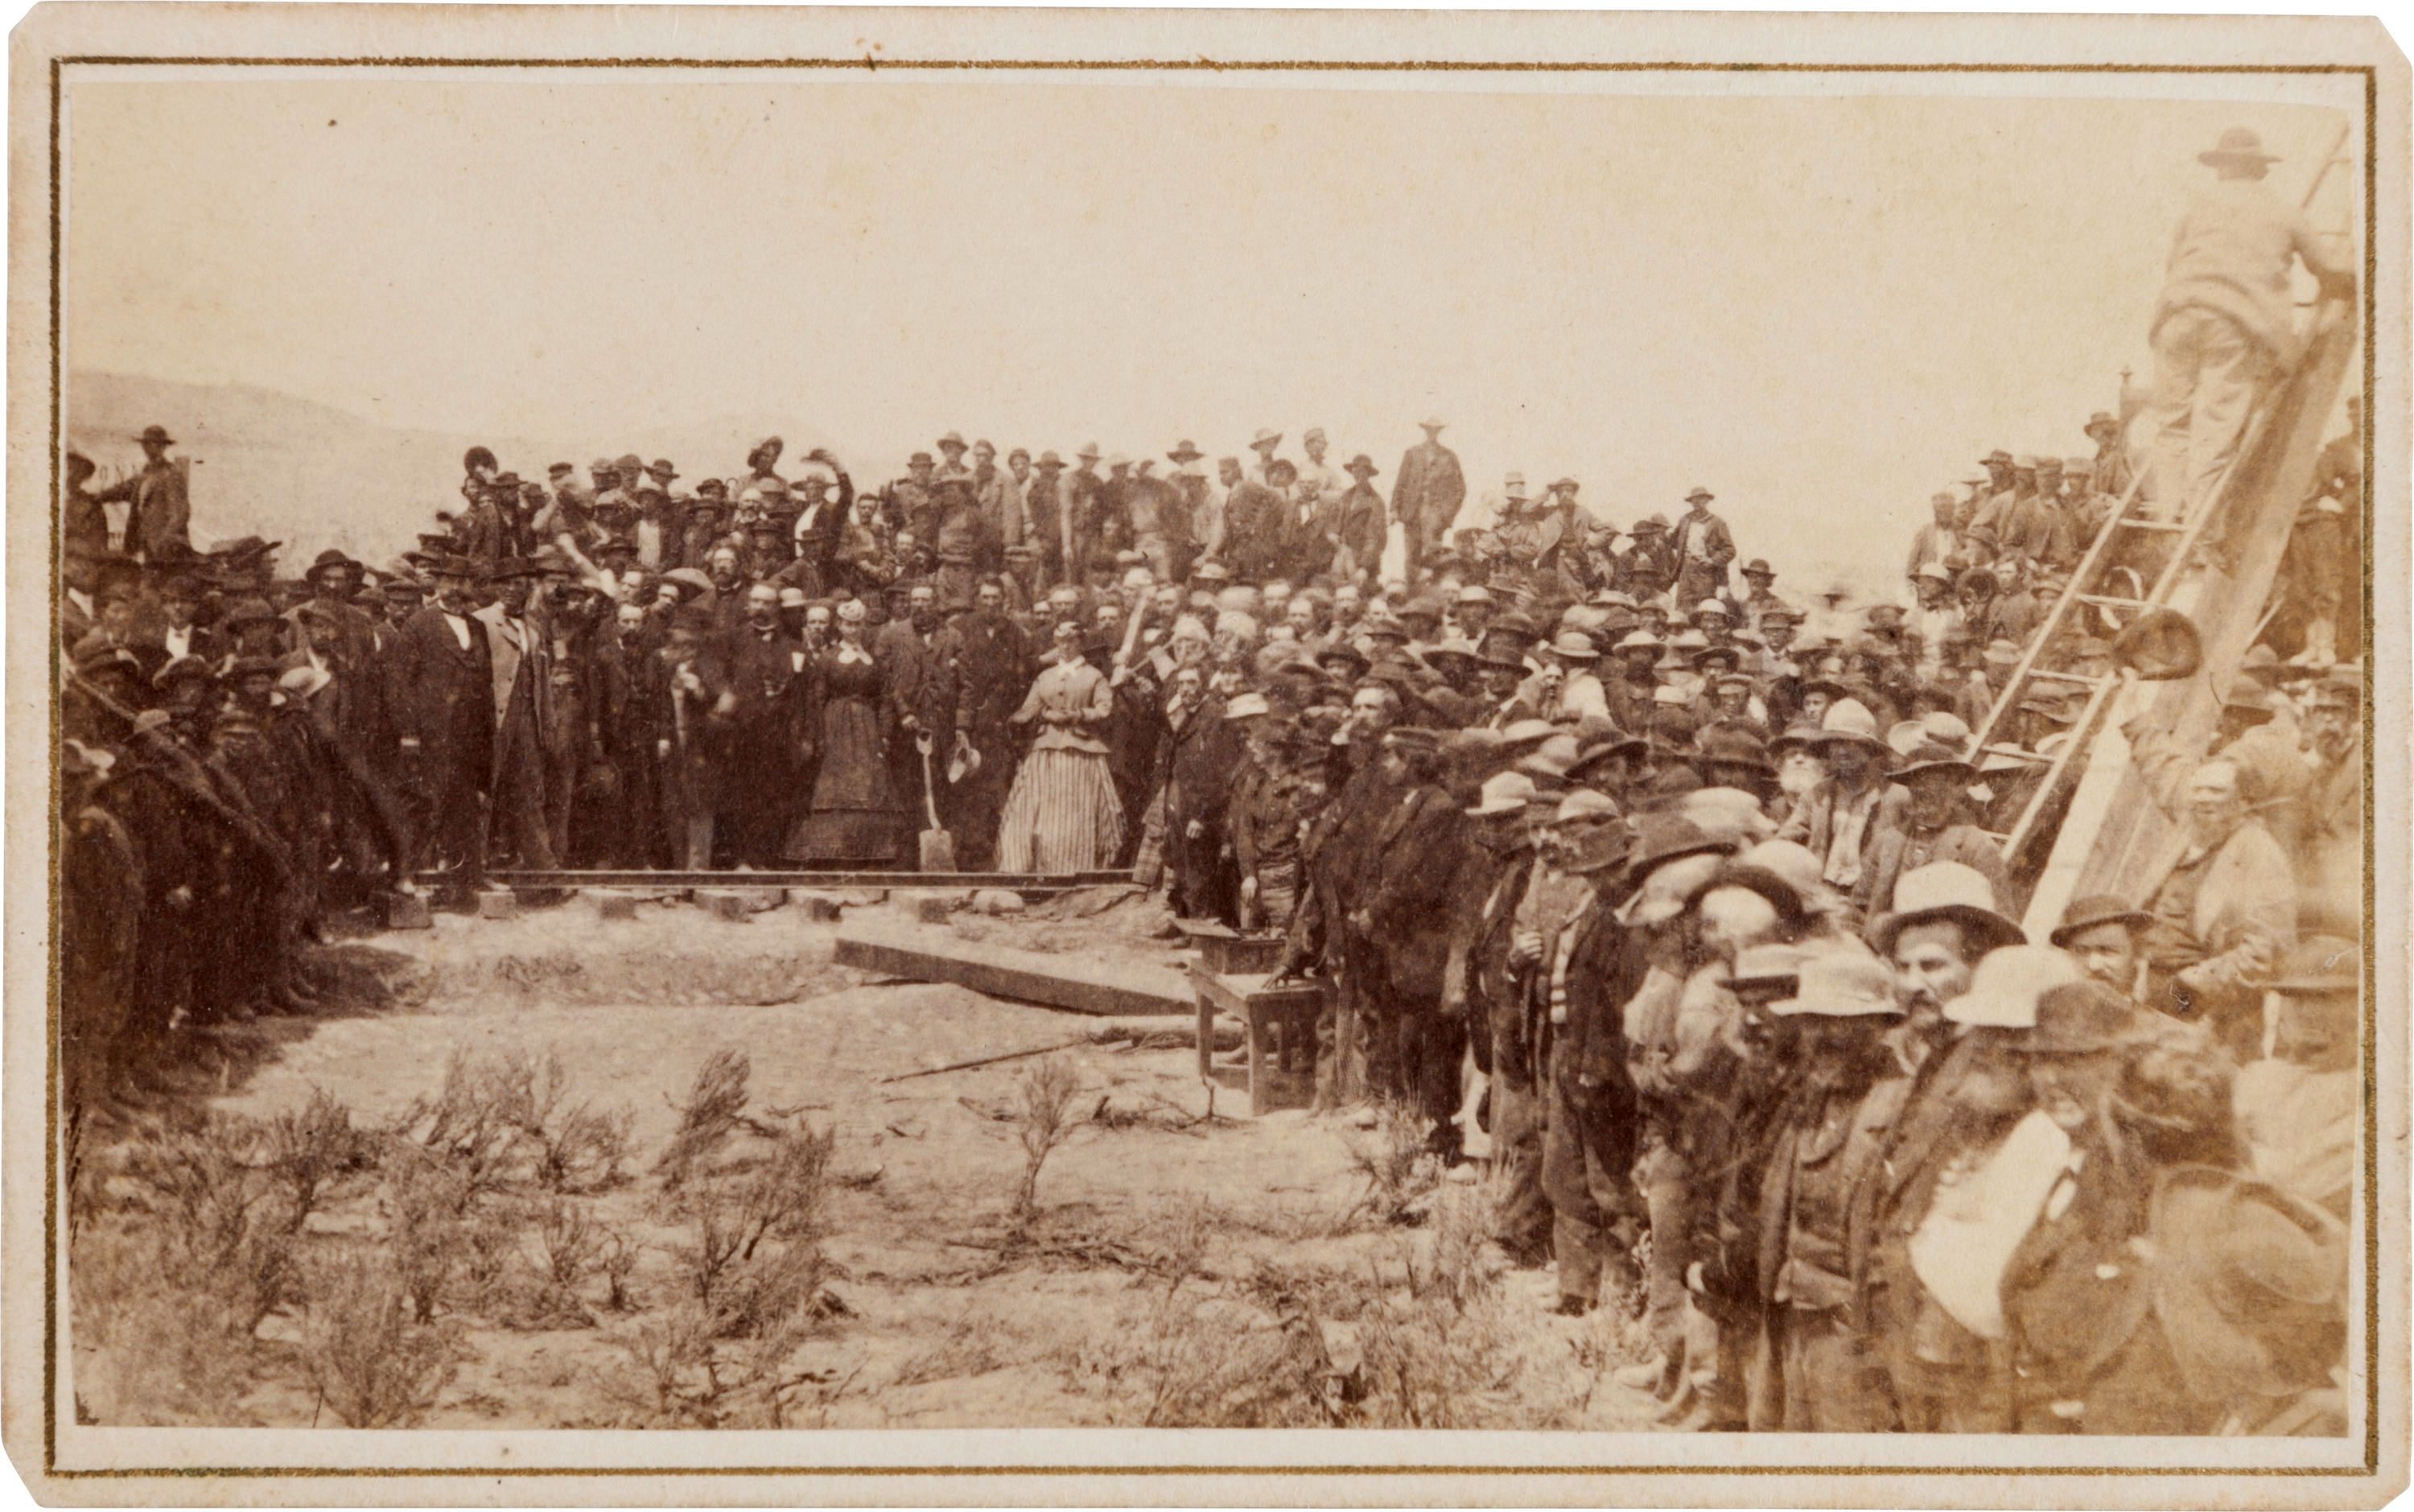 Col. Savage's photograph of the event was not inspiring enough for the railroad executives.